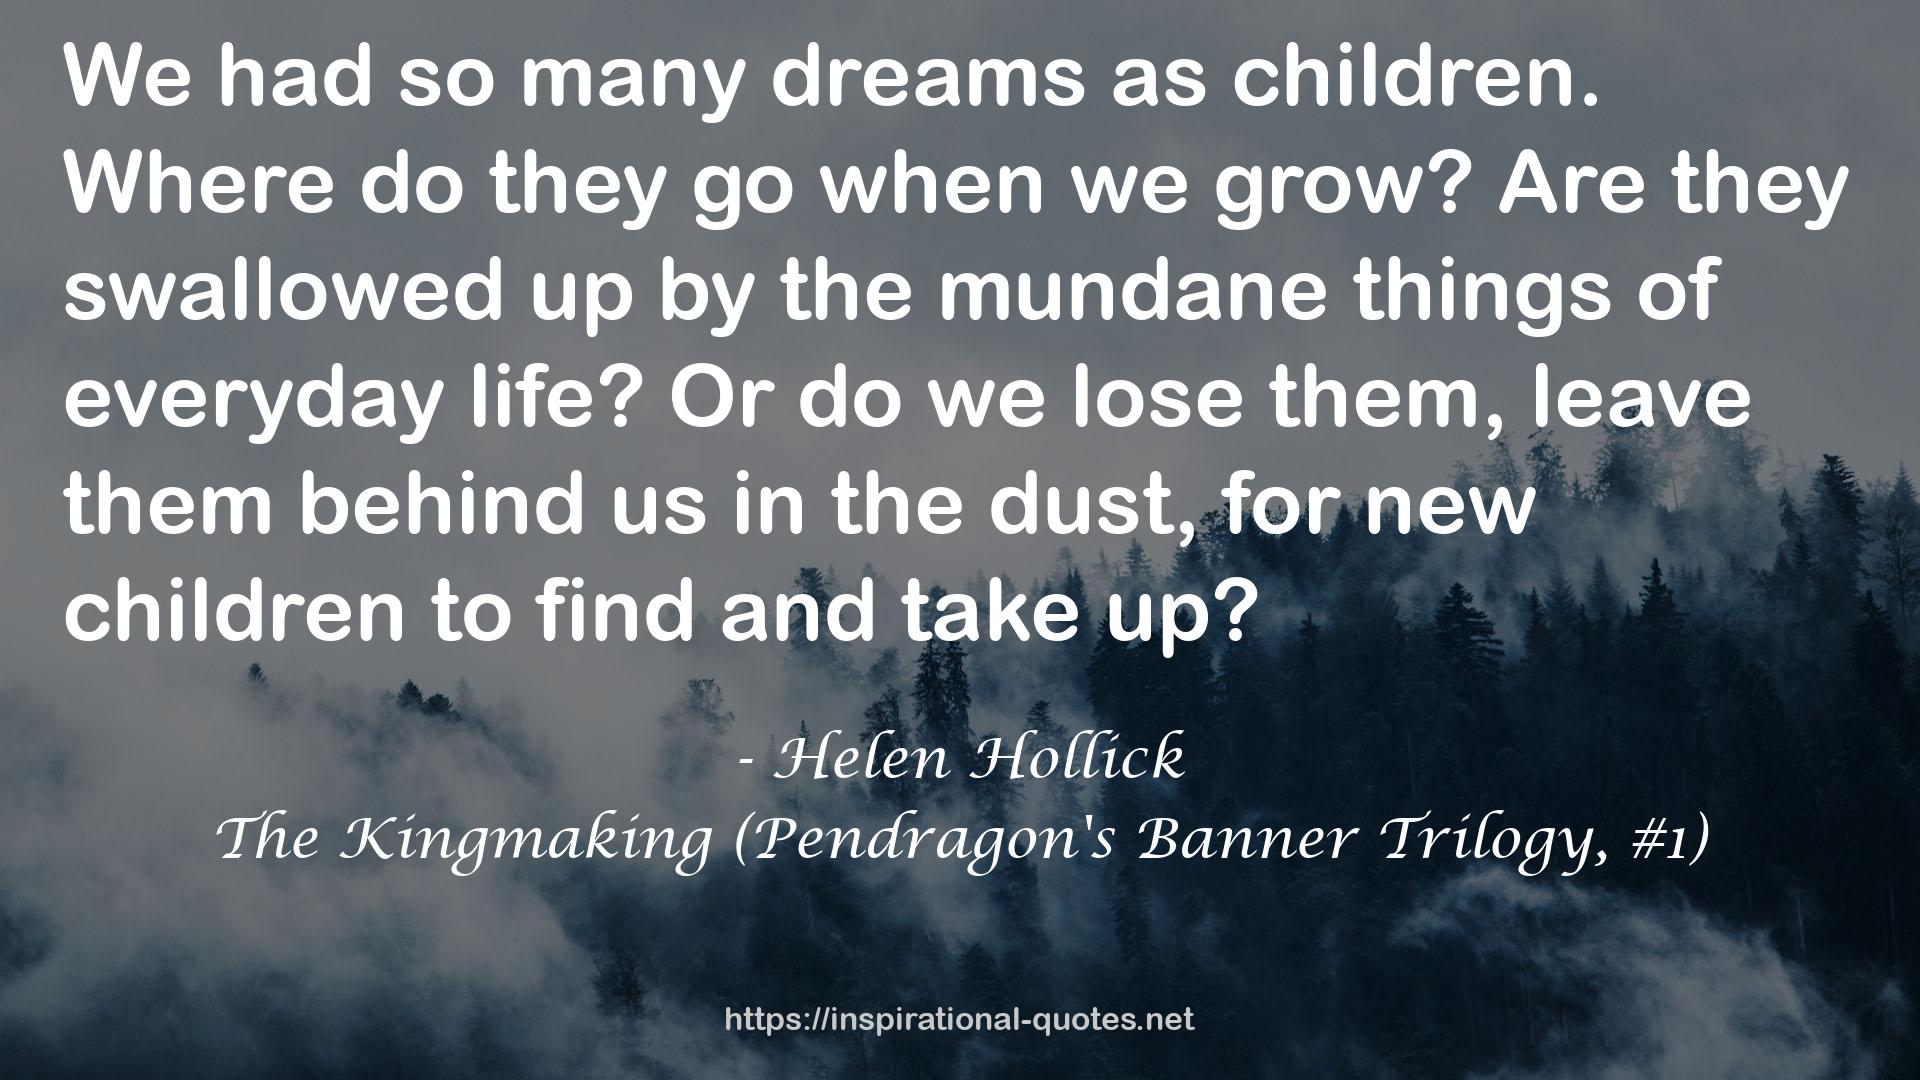 The Kingmaking (Pendragon's Banner Trilogy, #1) QUOTES